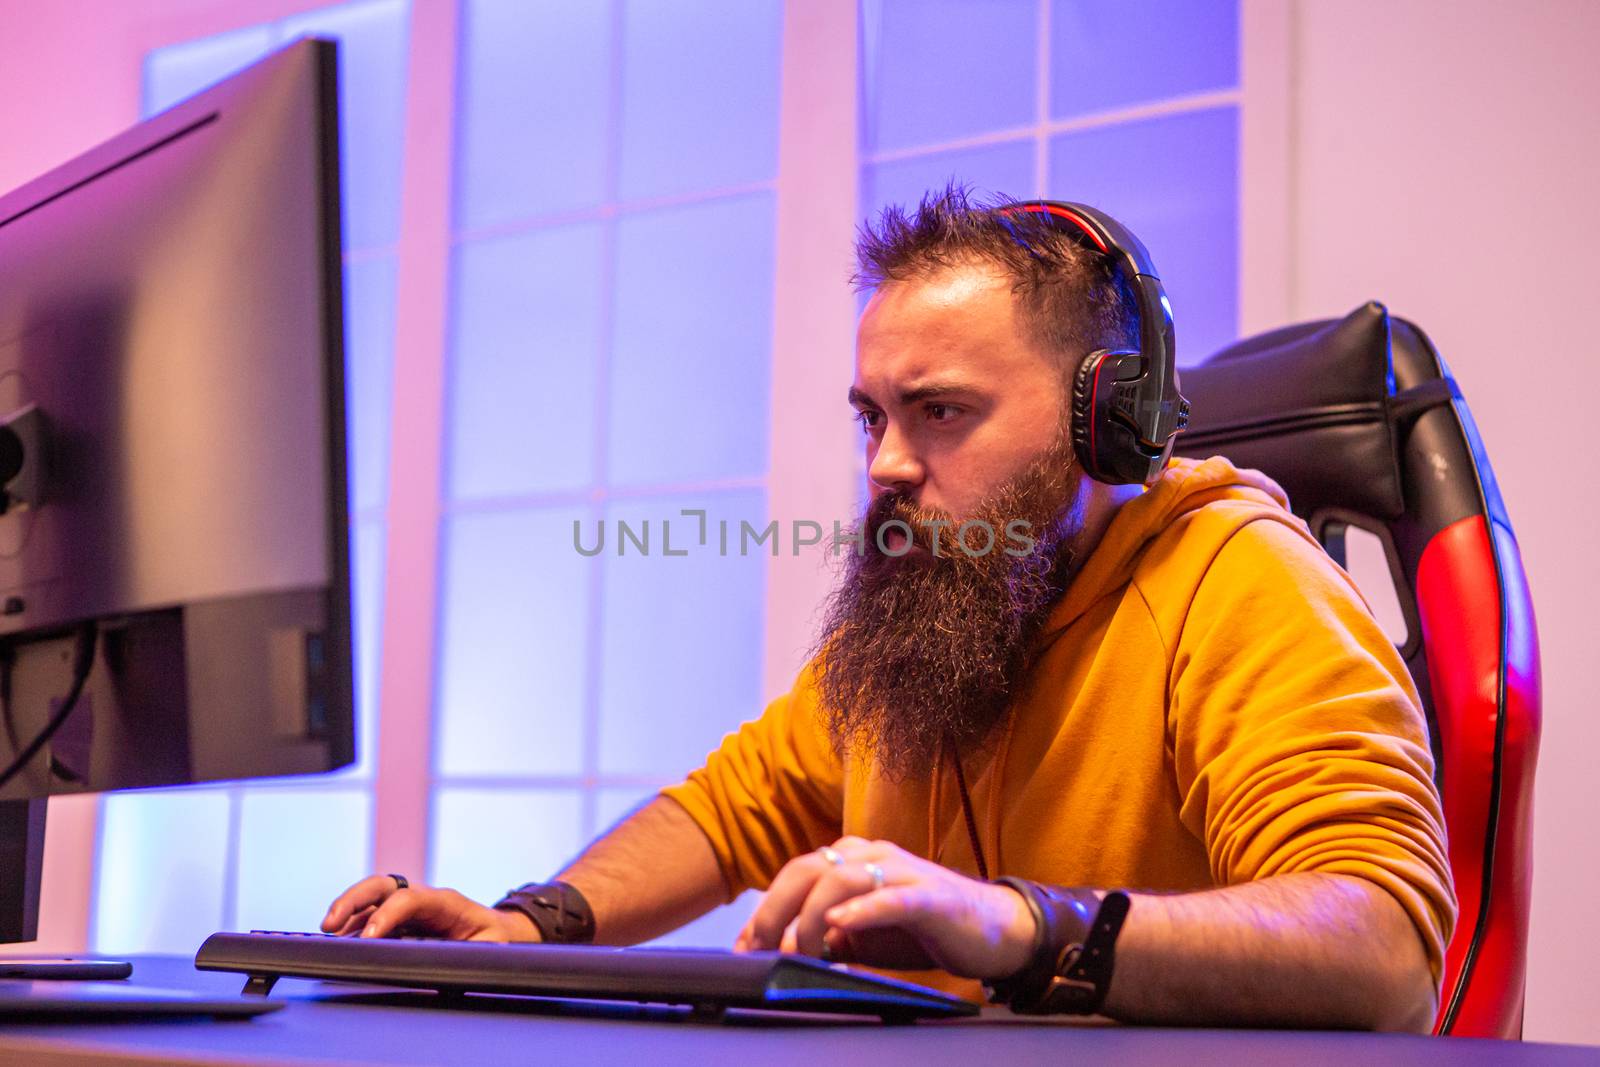 Professional gamer with long beard in front of powerful gaming r by DCStudio